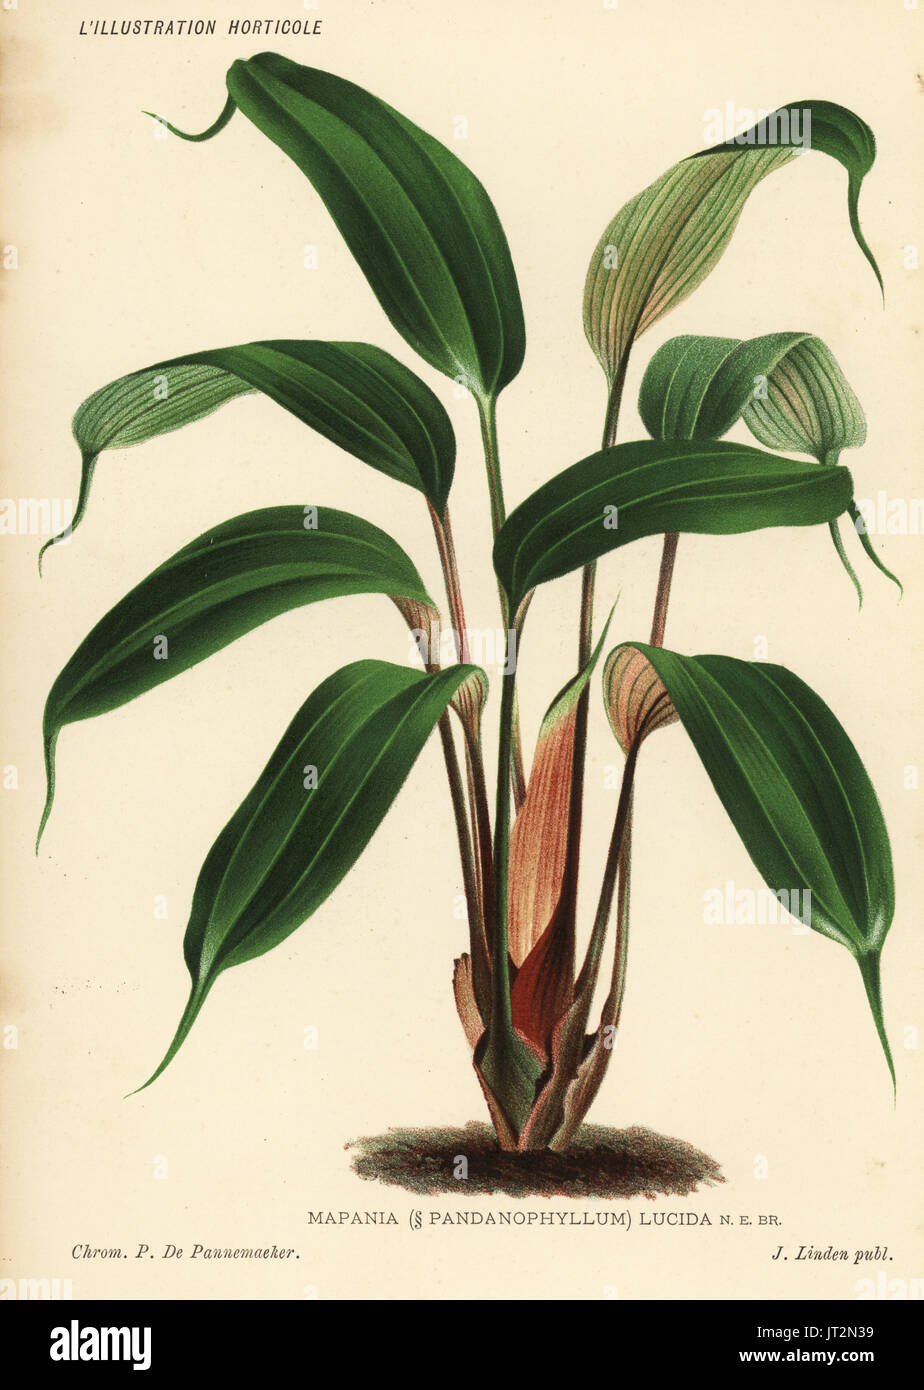 Mapania cuspidata (Mapania lucida). Chromolithograph by Pieter de Pannemaeker from Jean Linden's l'Illustration Horticole, Brussels, 1885. Stock Photo